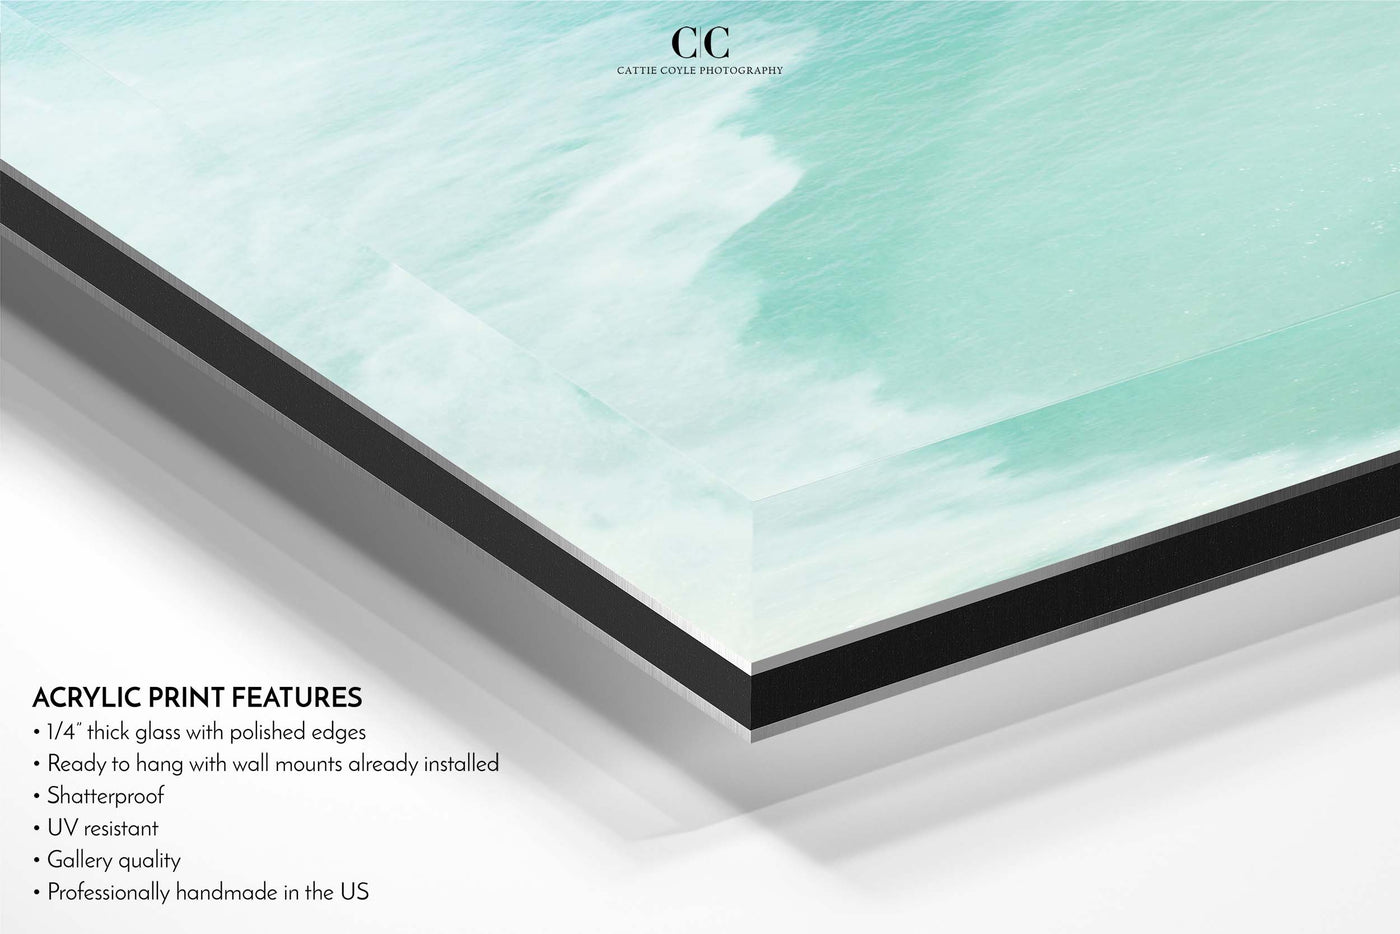 Magoito – Seafoam green ocean acrylic glass print by Cattie Coyle Photography